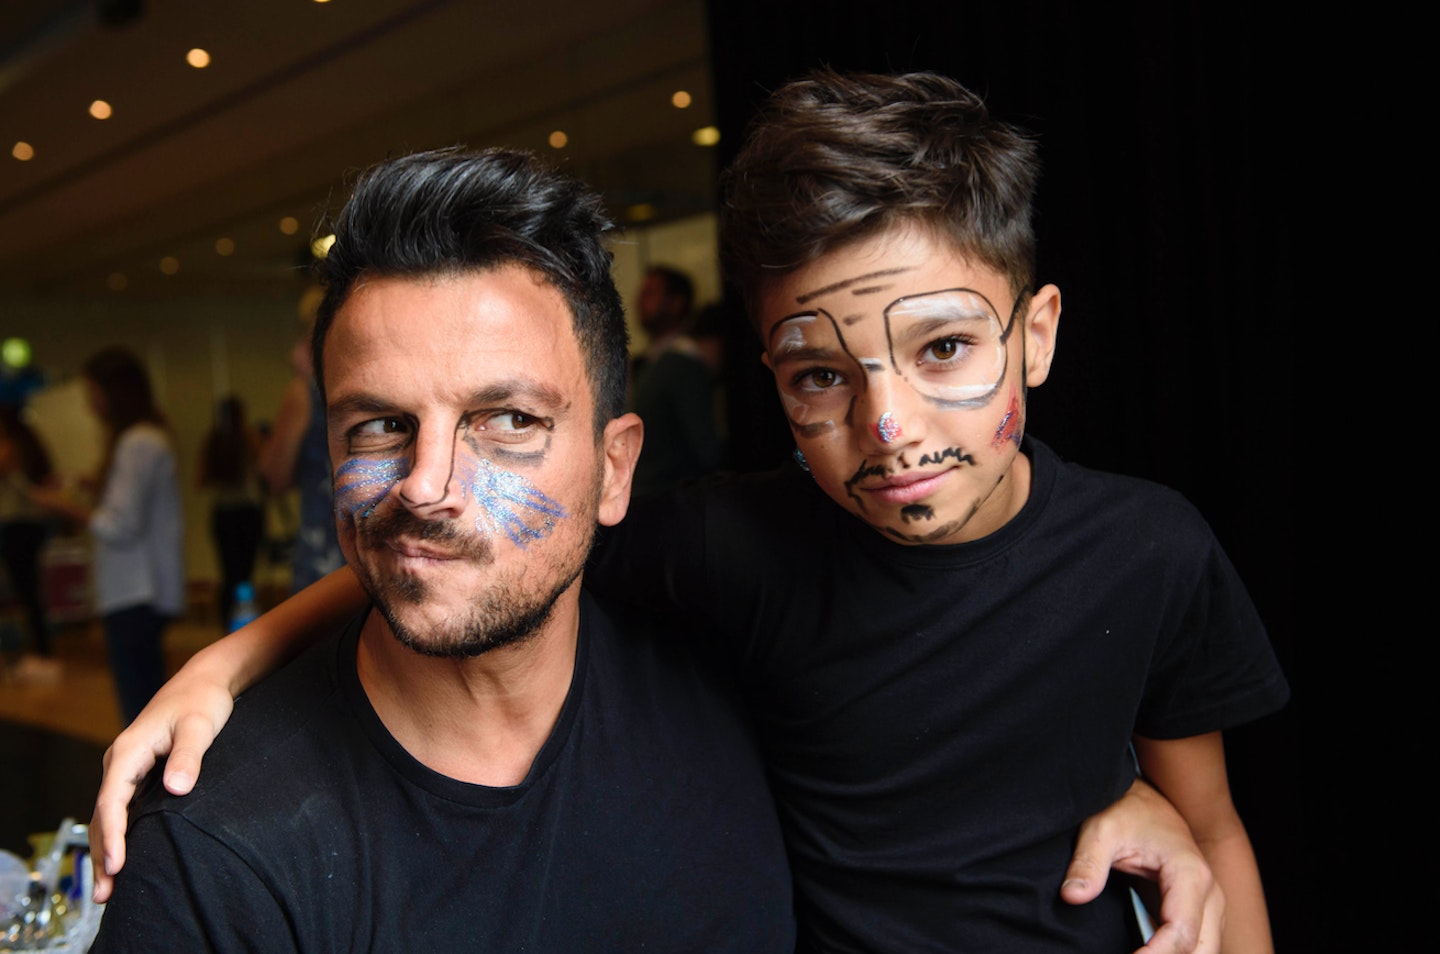 Peter and Junior Andre